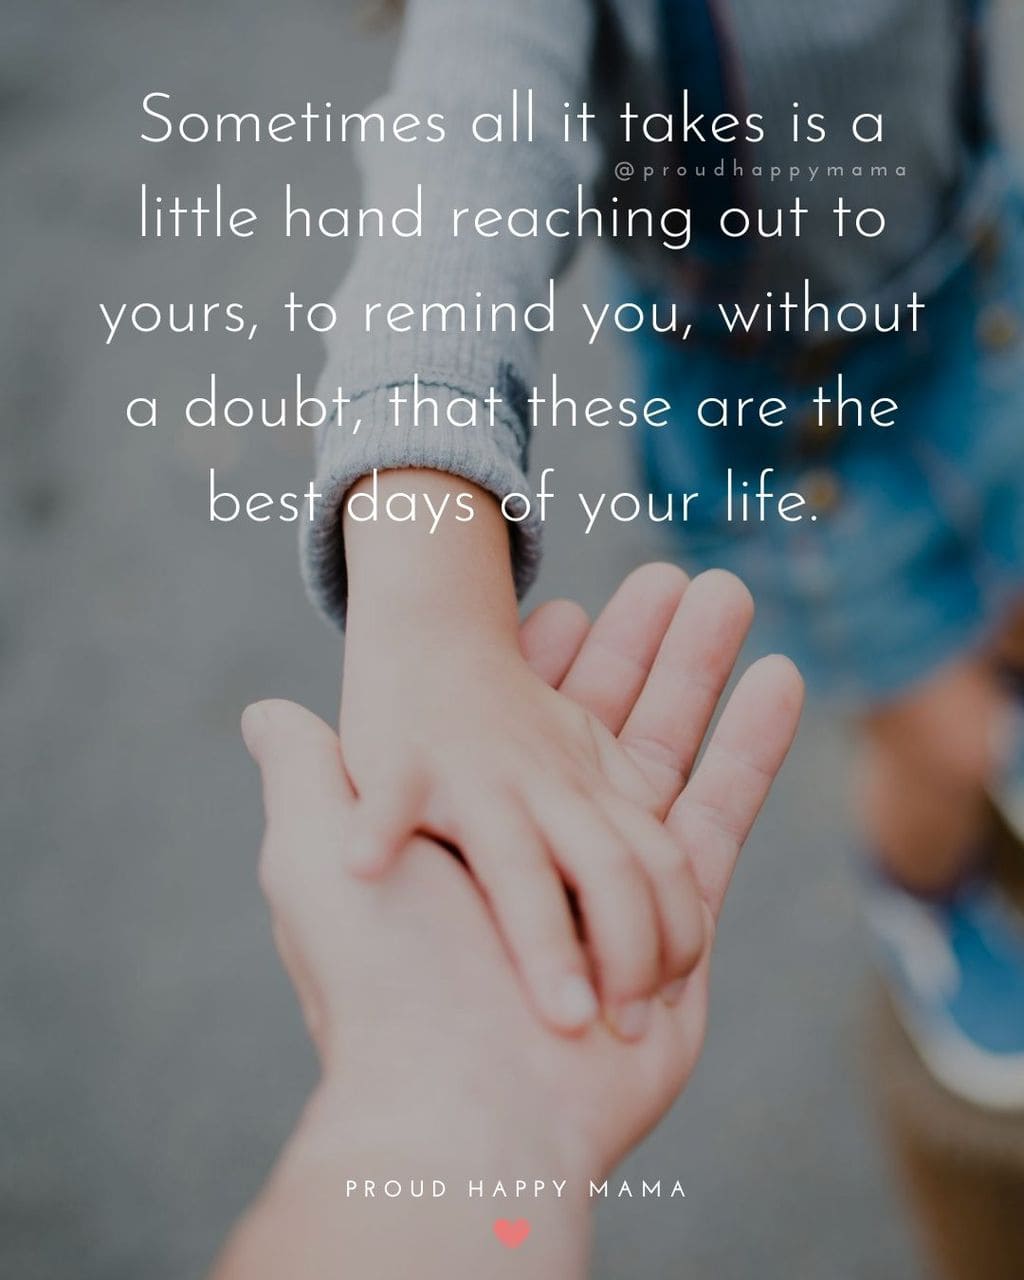 Inspirational Family Quotes | Sometimes all it takes is a little hand reaching out to yours, to remind you, without a doubt, that these are the best days of your life.